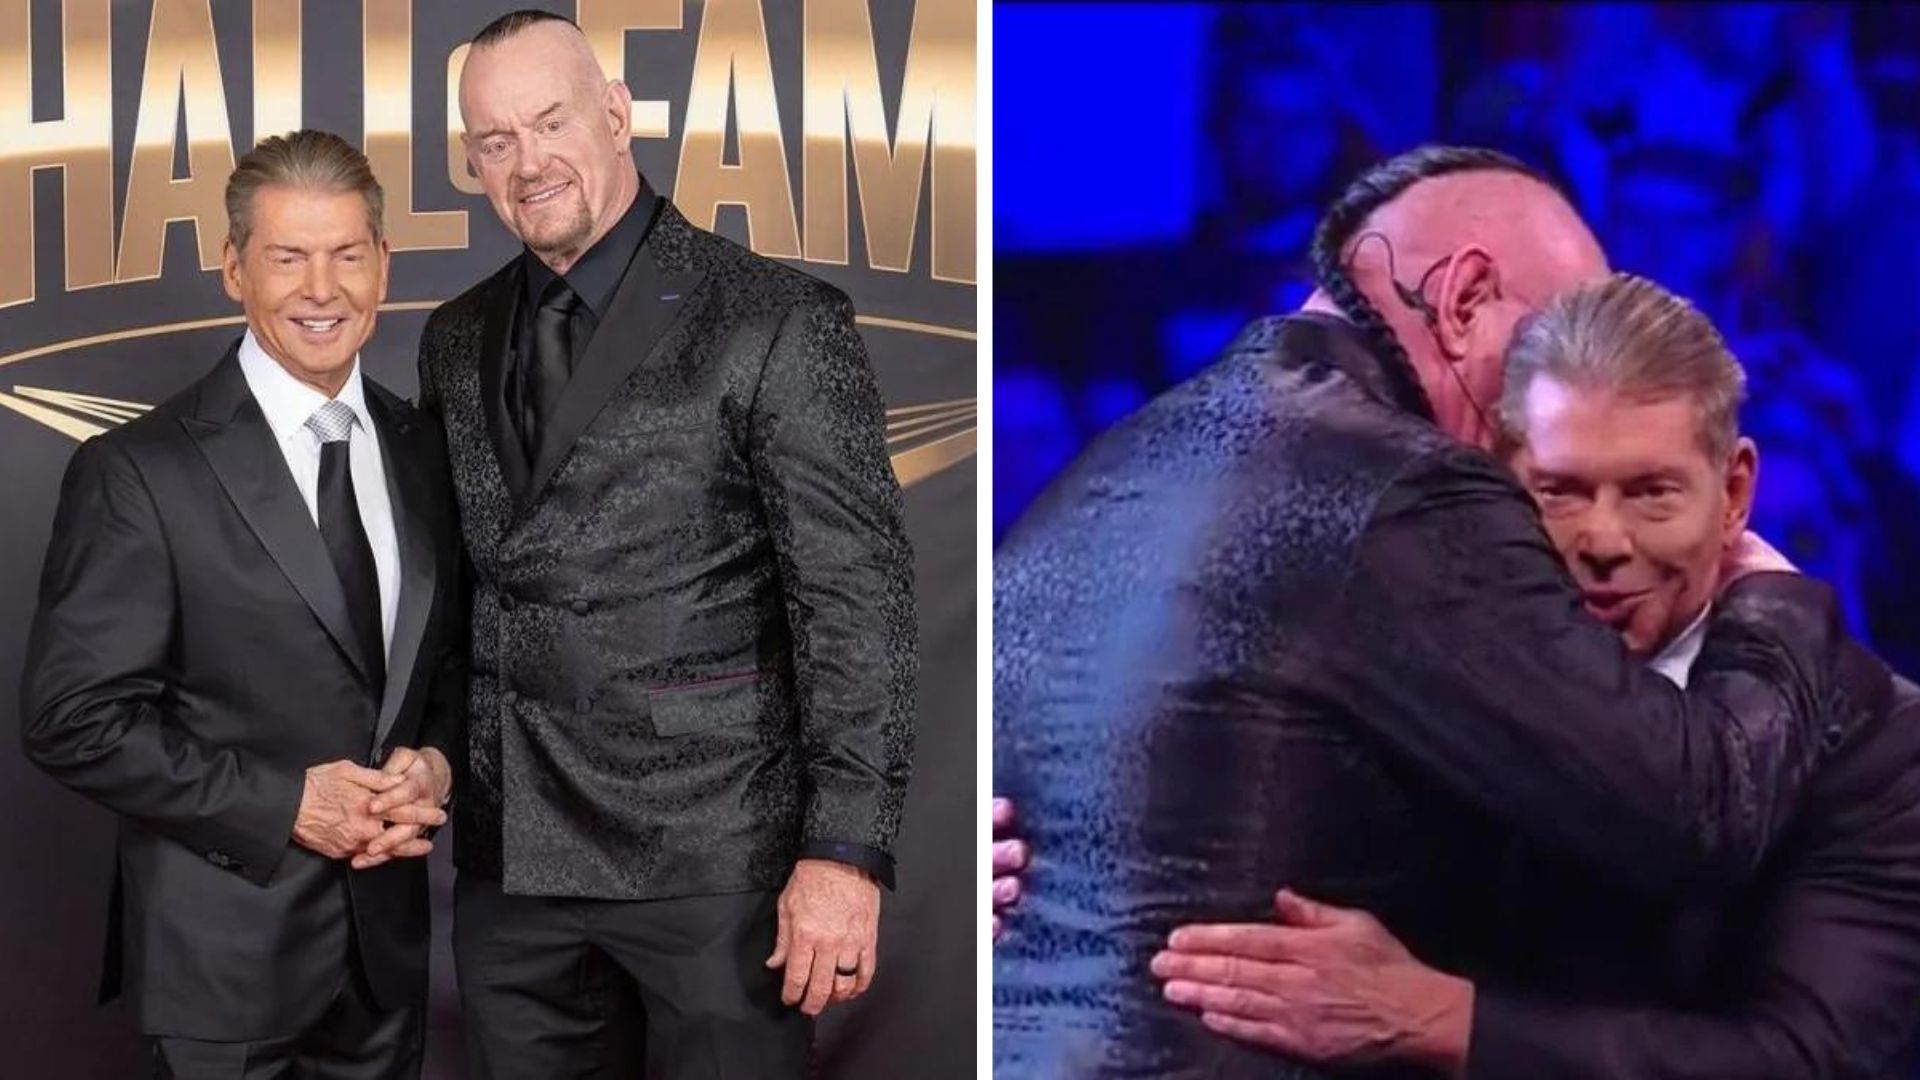 Vince McMahon inducted The Undertaker into the WWE Hall of Fame.